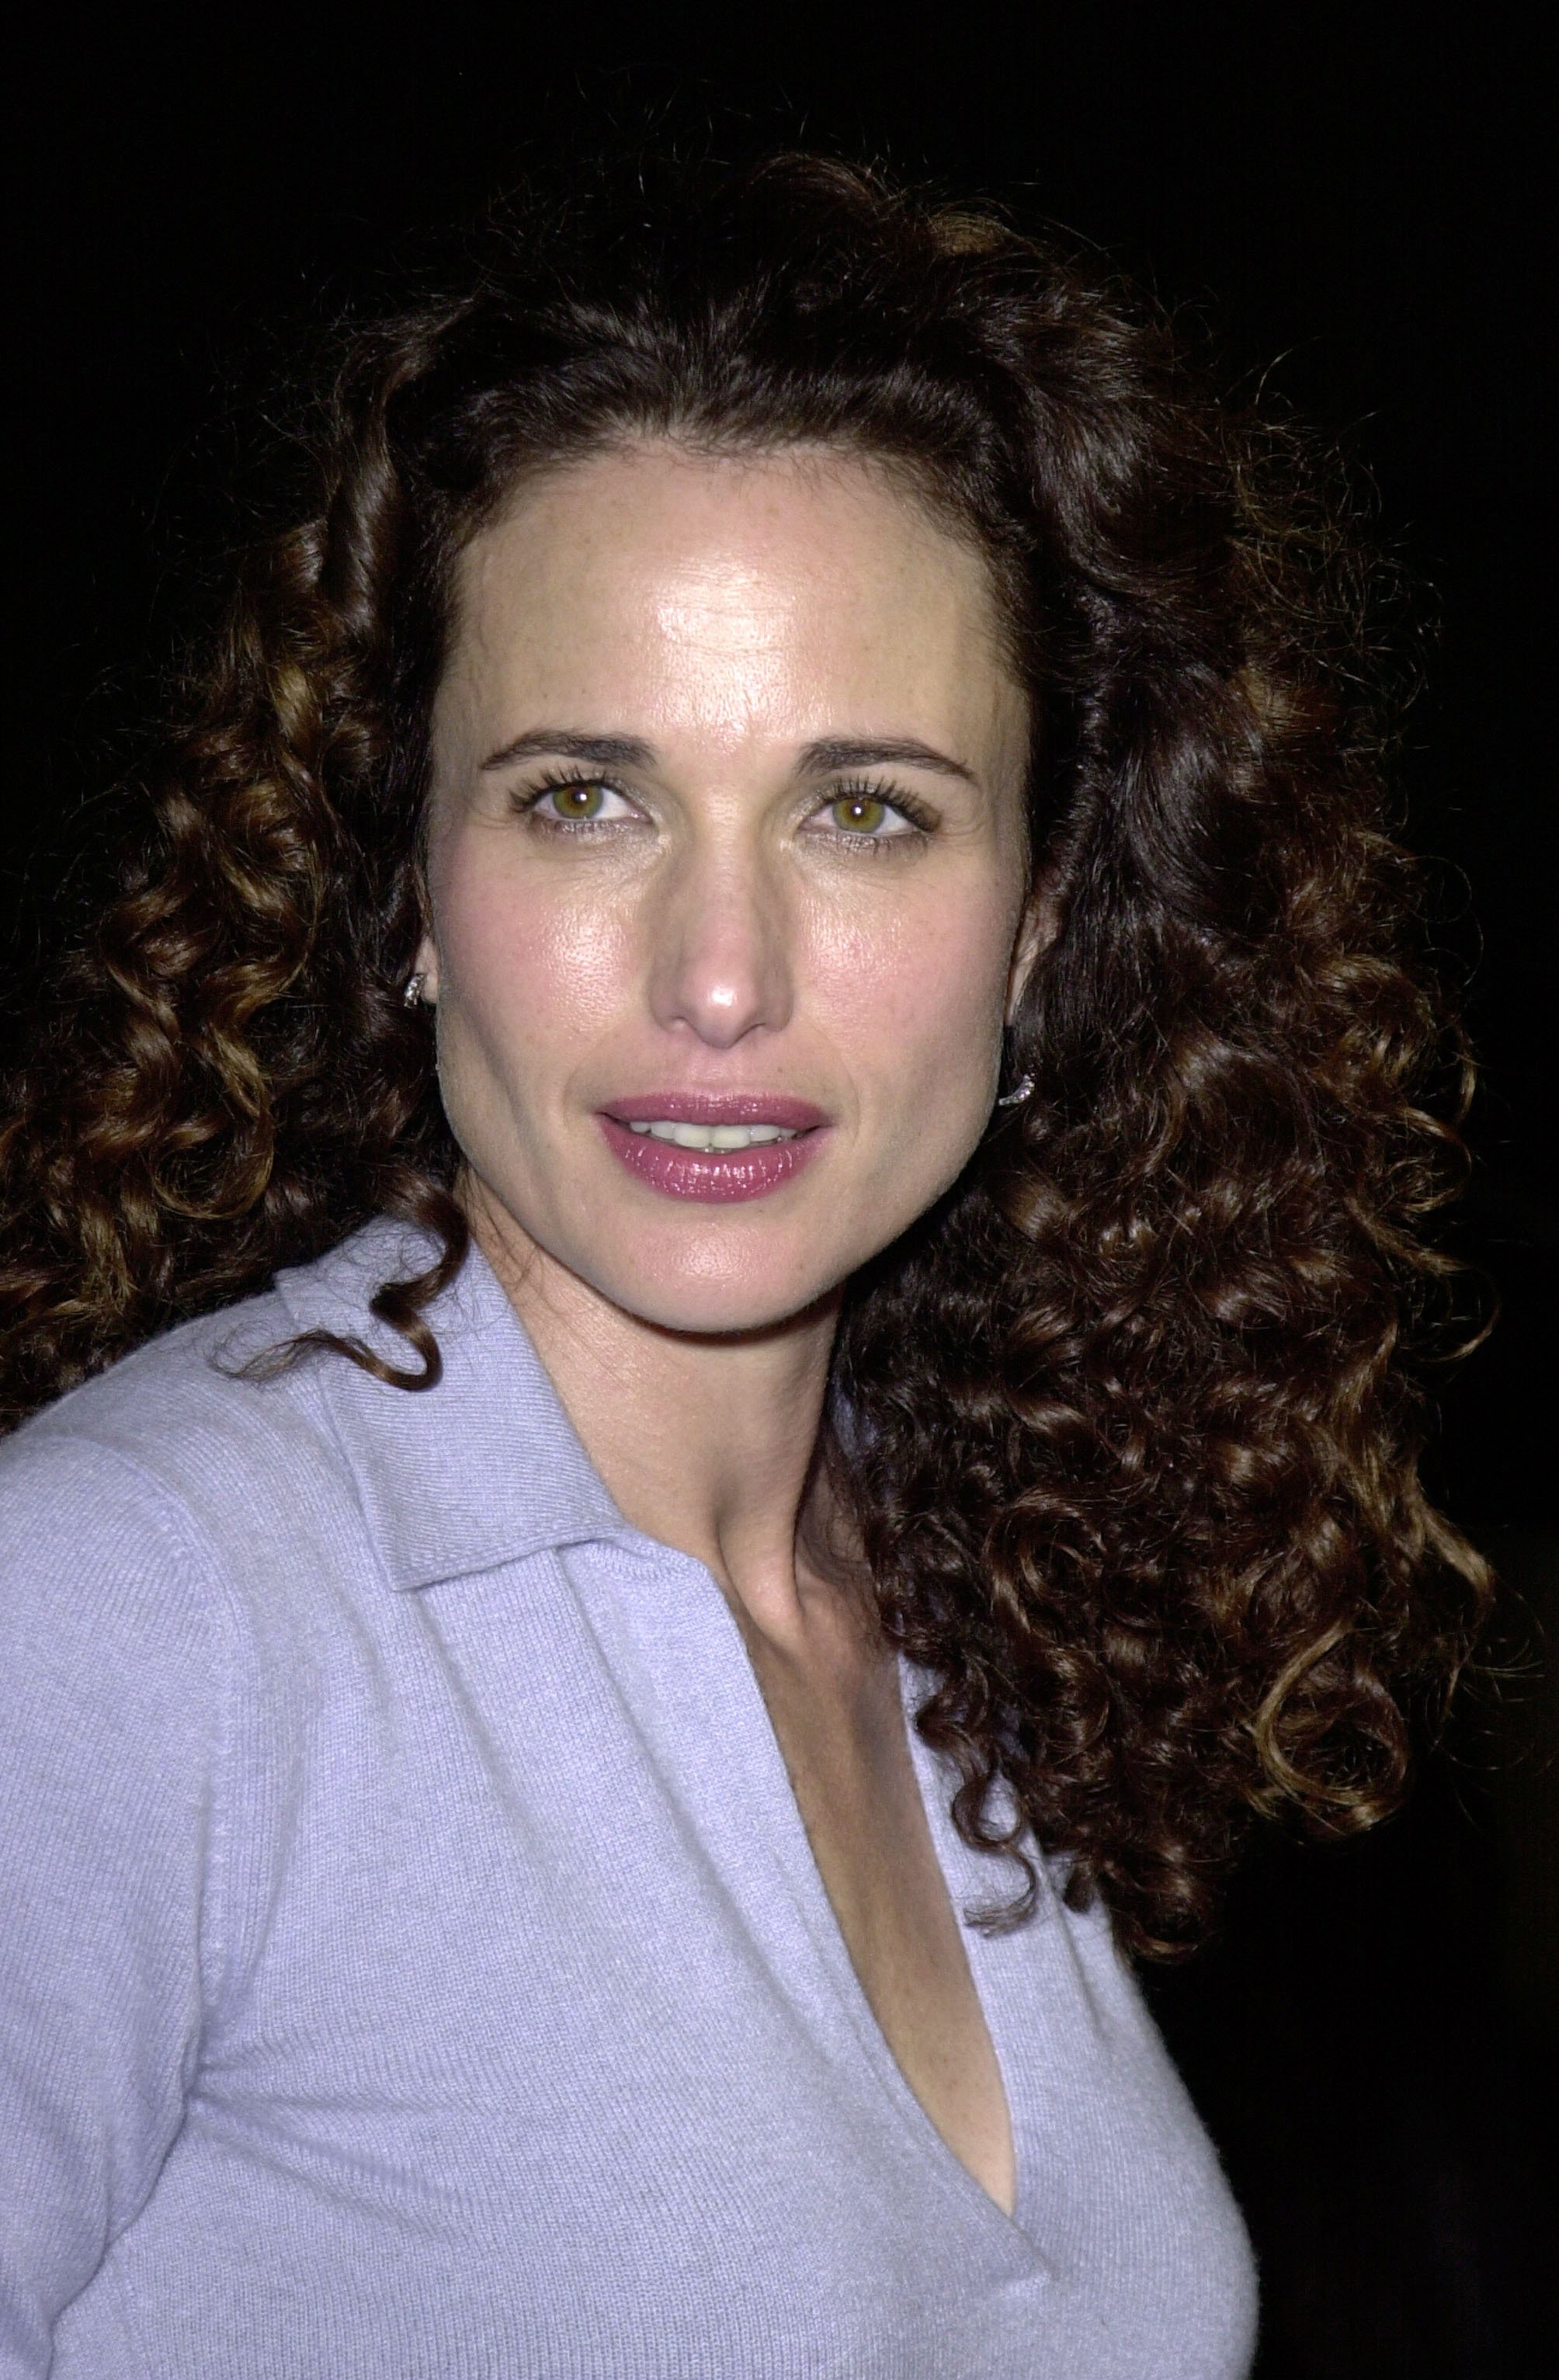 Andie MacDowell at a film premiere in Los Angeles | Source: Getty Images